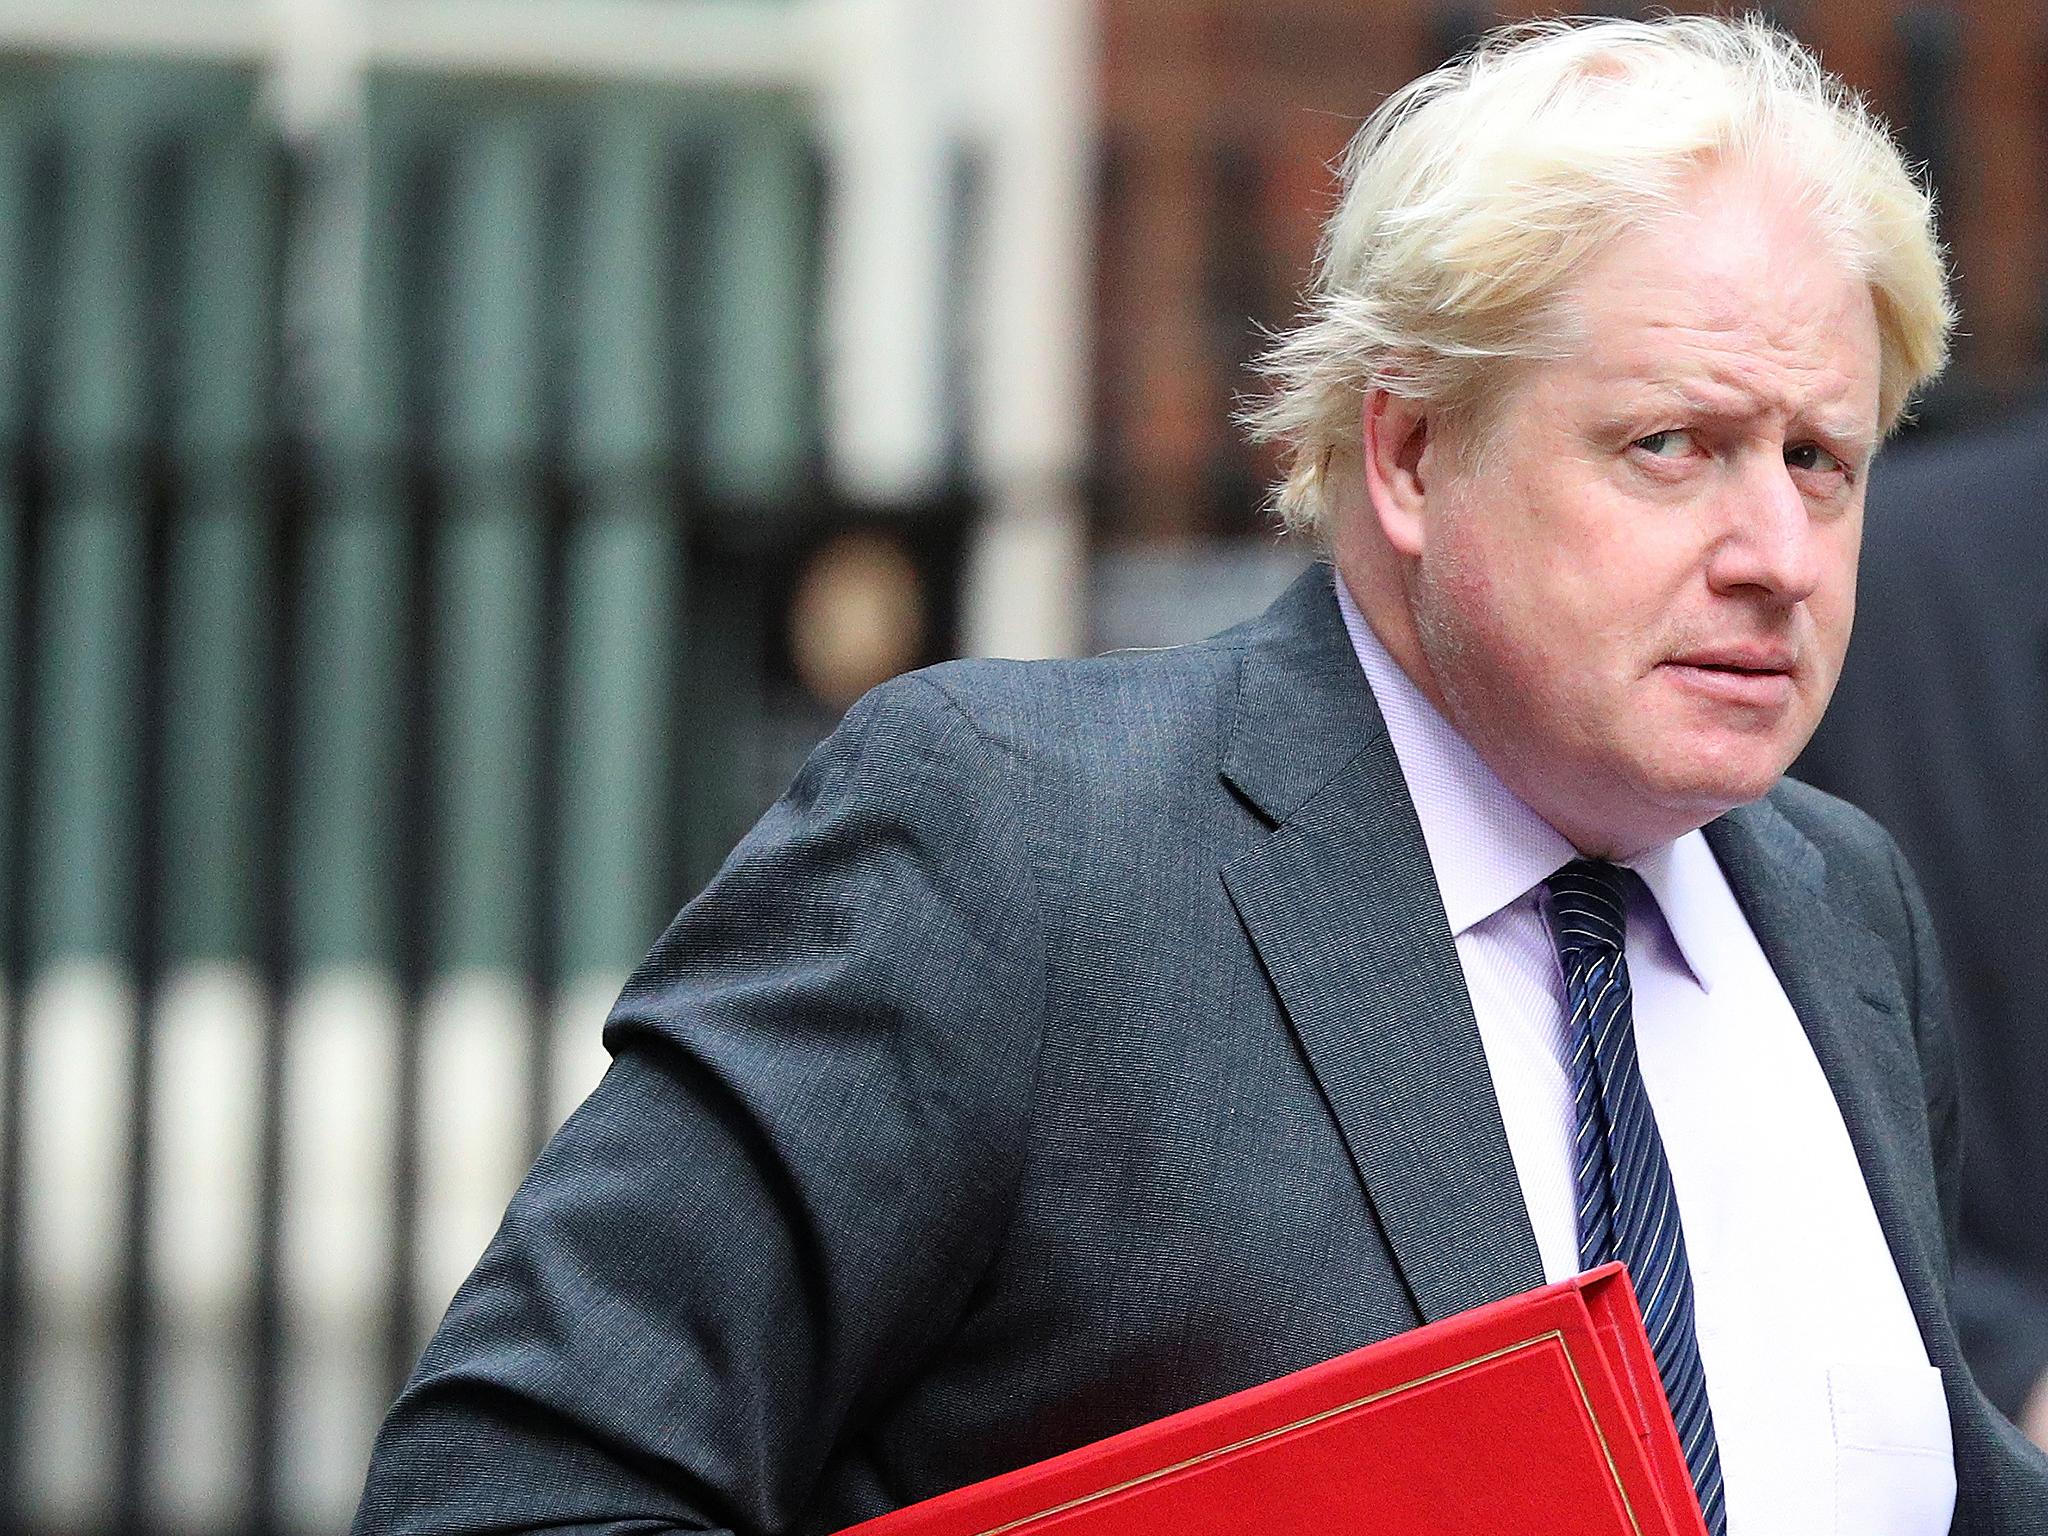 Boris Johnson faced calls to resign over his gaffe about Ms Zaghari-Ratcliffe